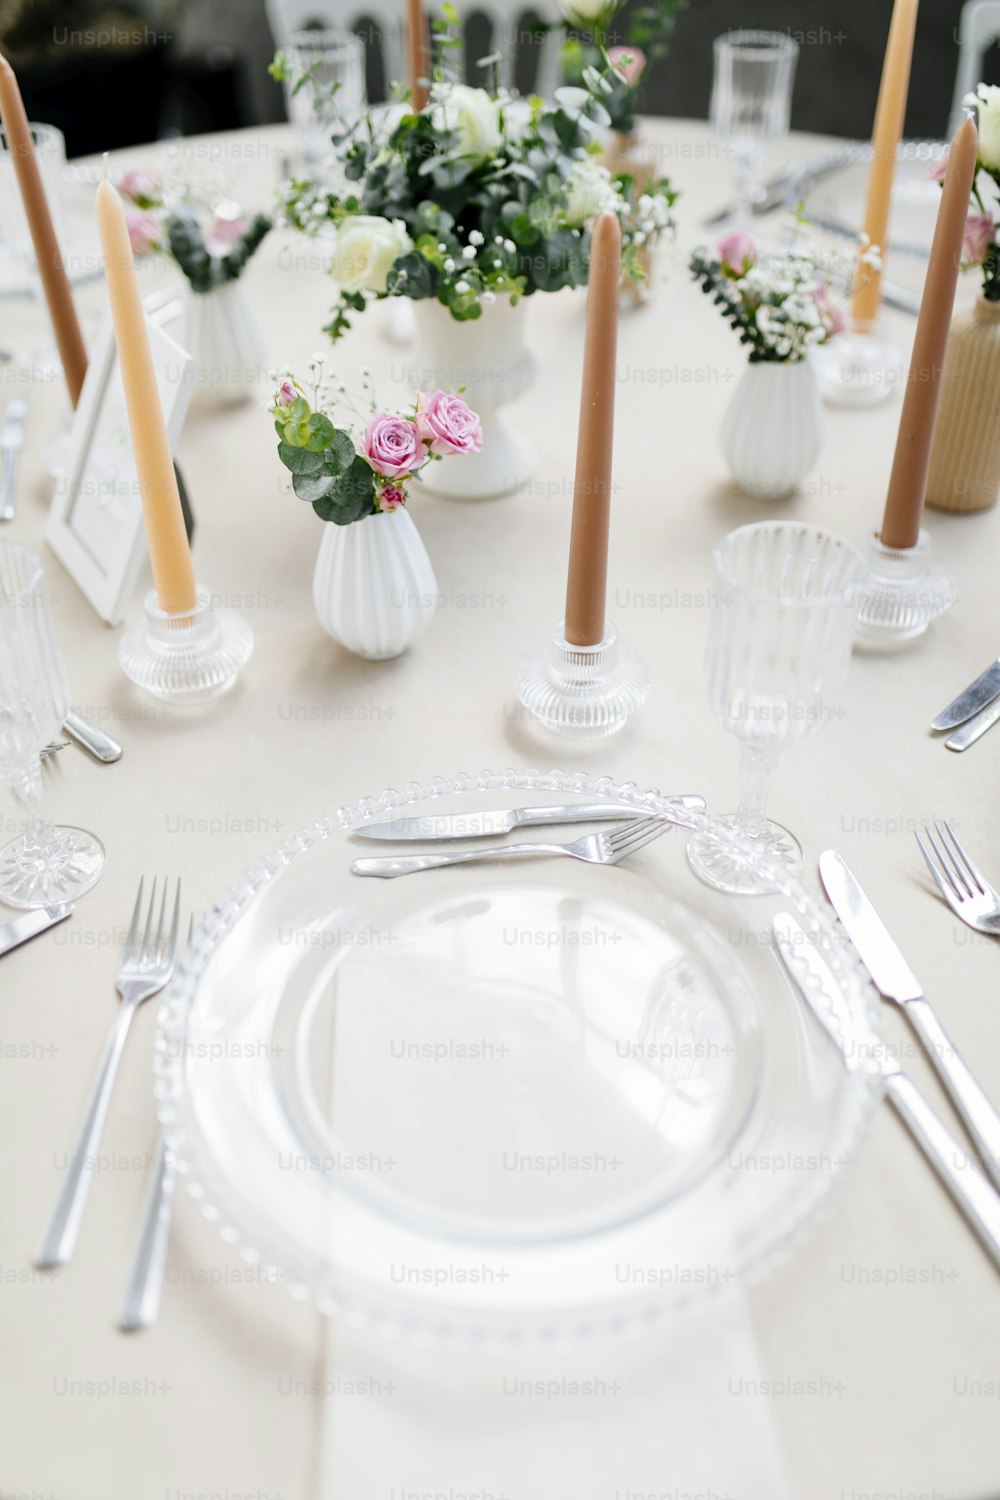 a table set with a white table cloth and silverware